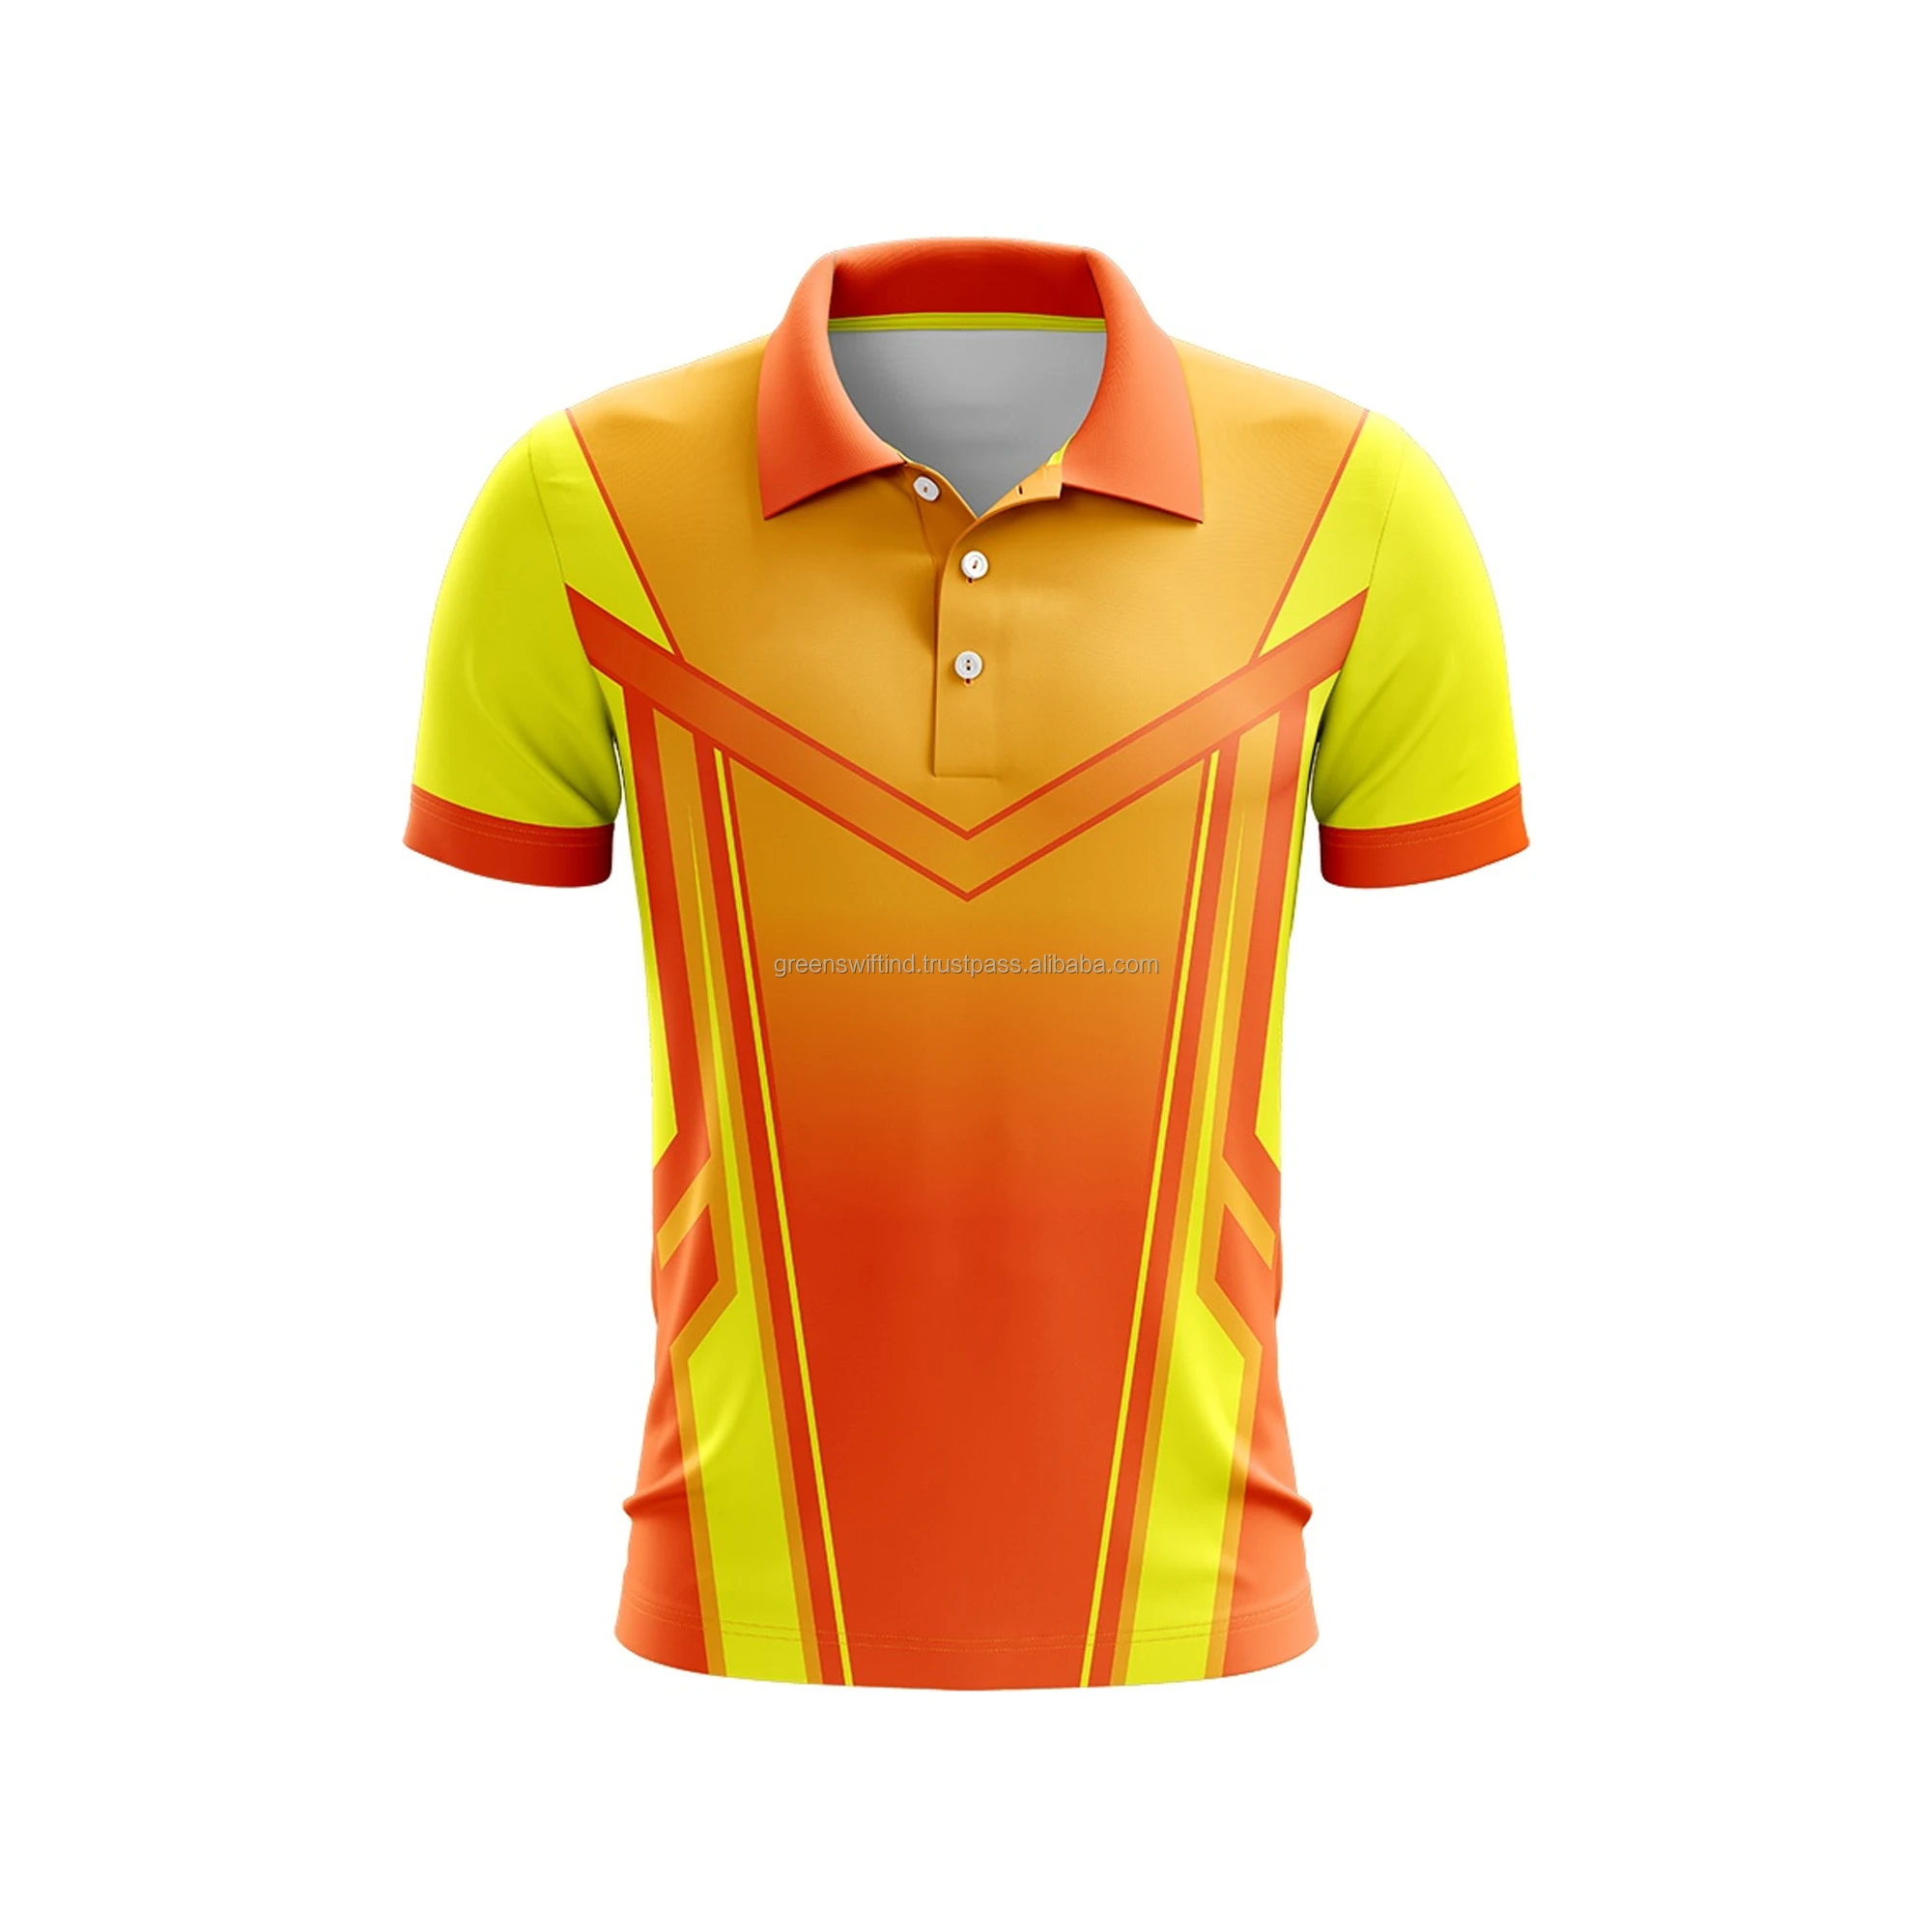 All Over Sublimated Sports Jersey - Orange Yellow Pattern